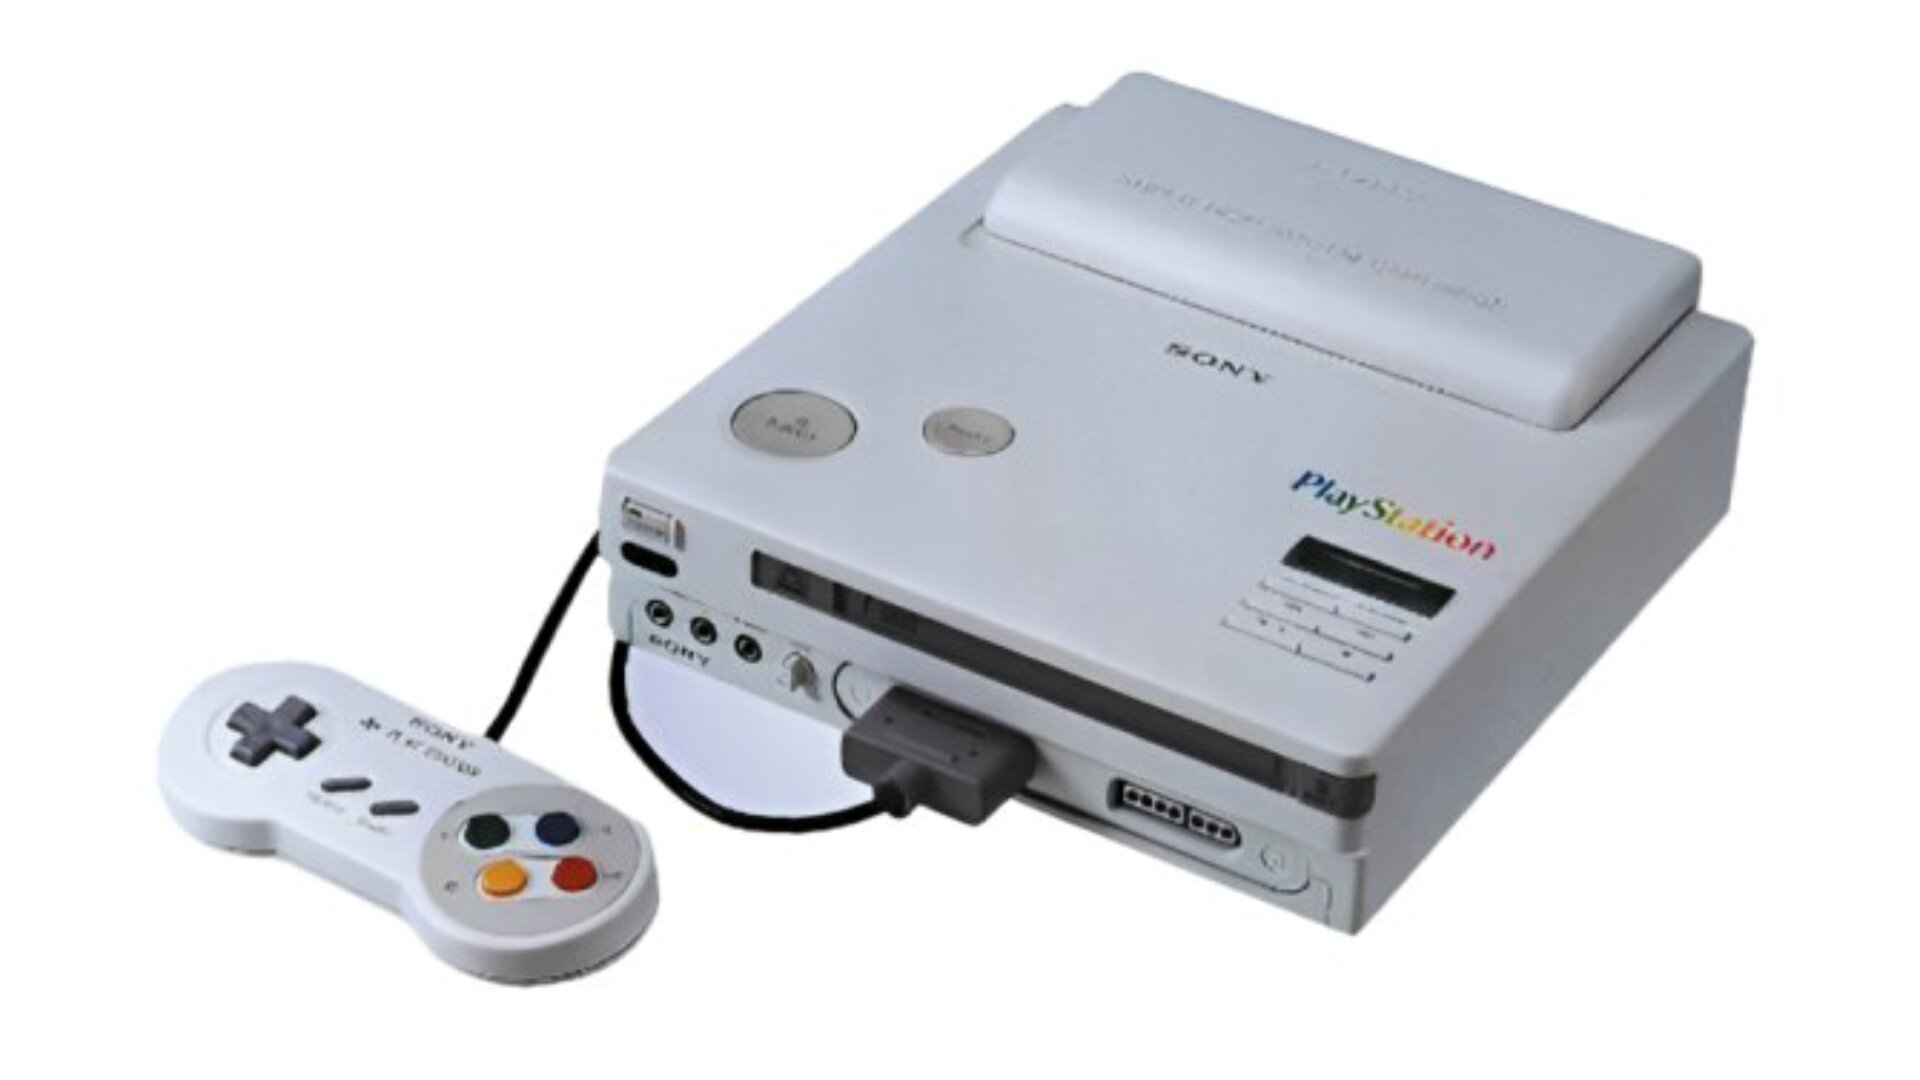 The unreleased prototype console, the Nintendo PlayStation